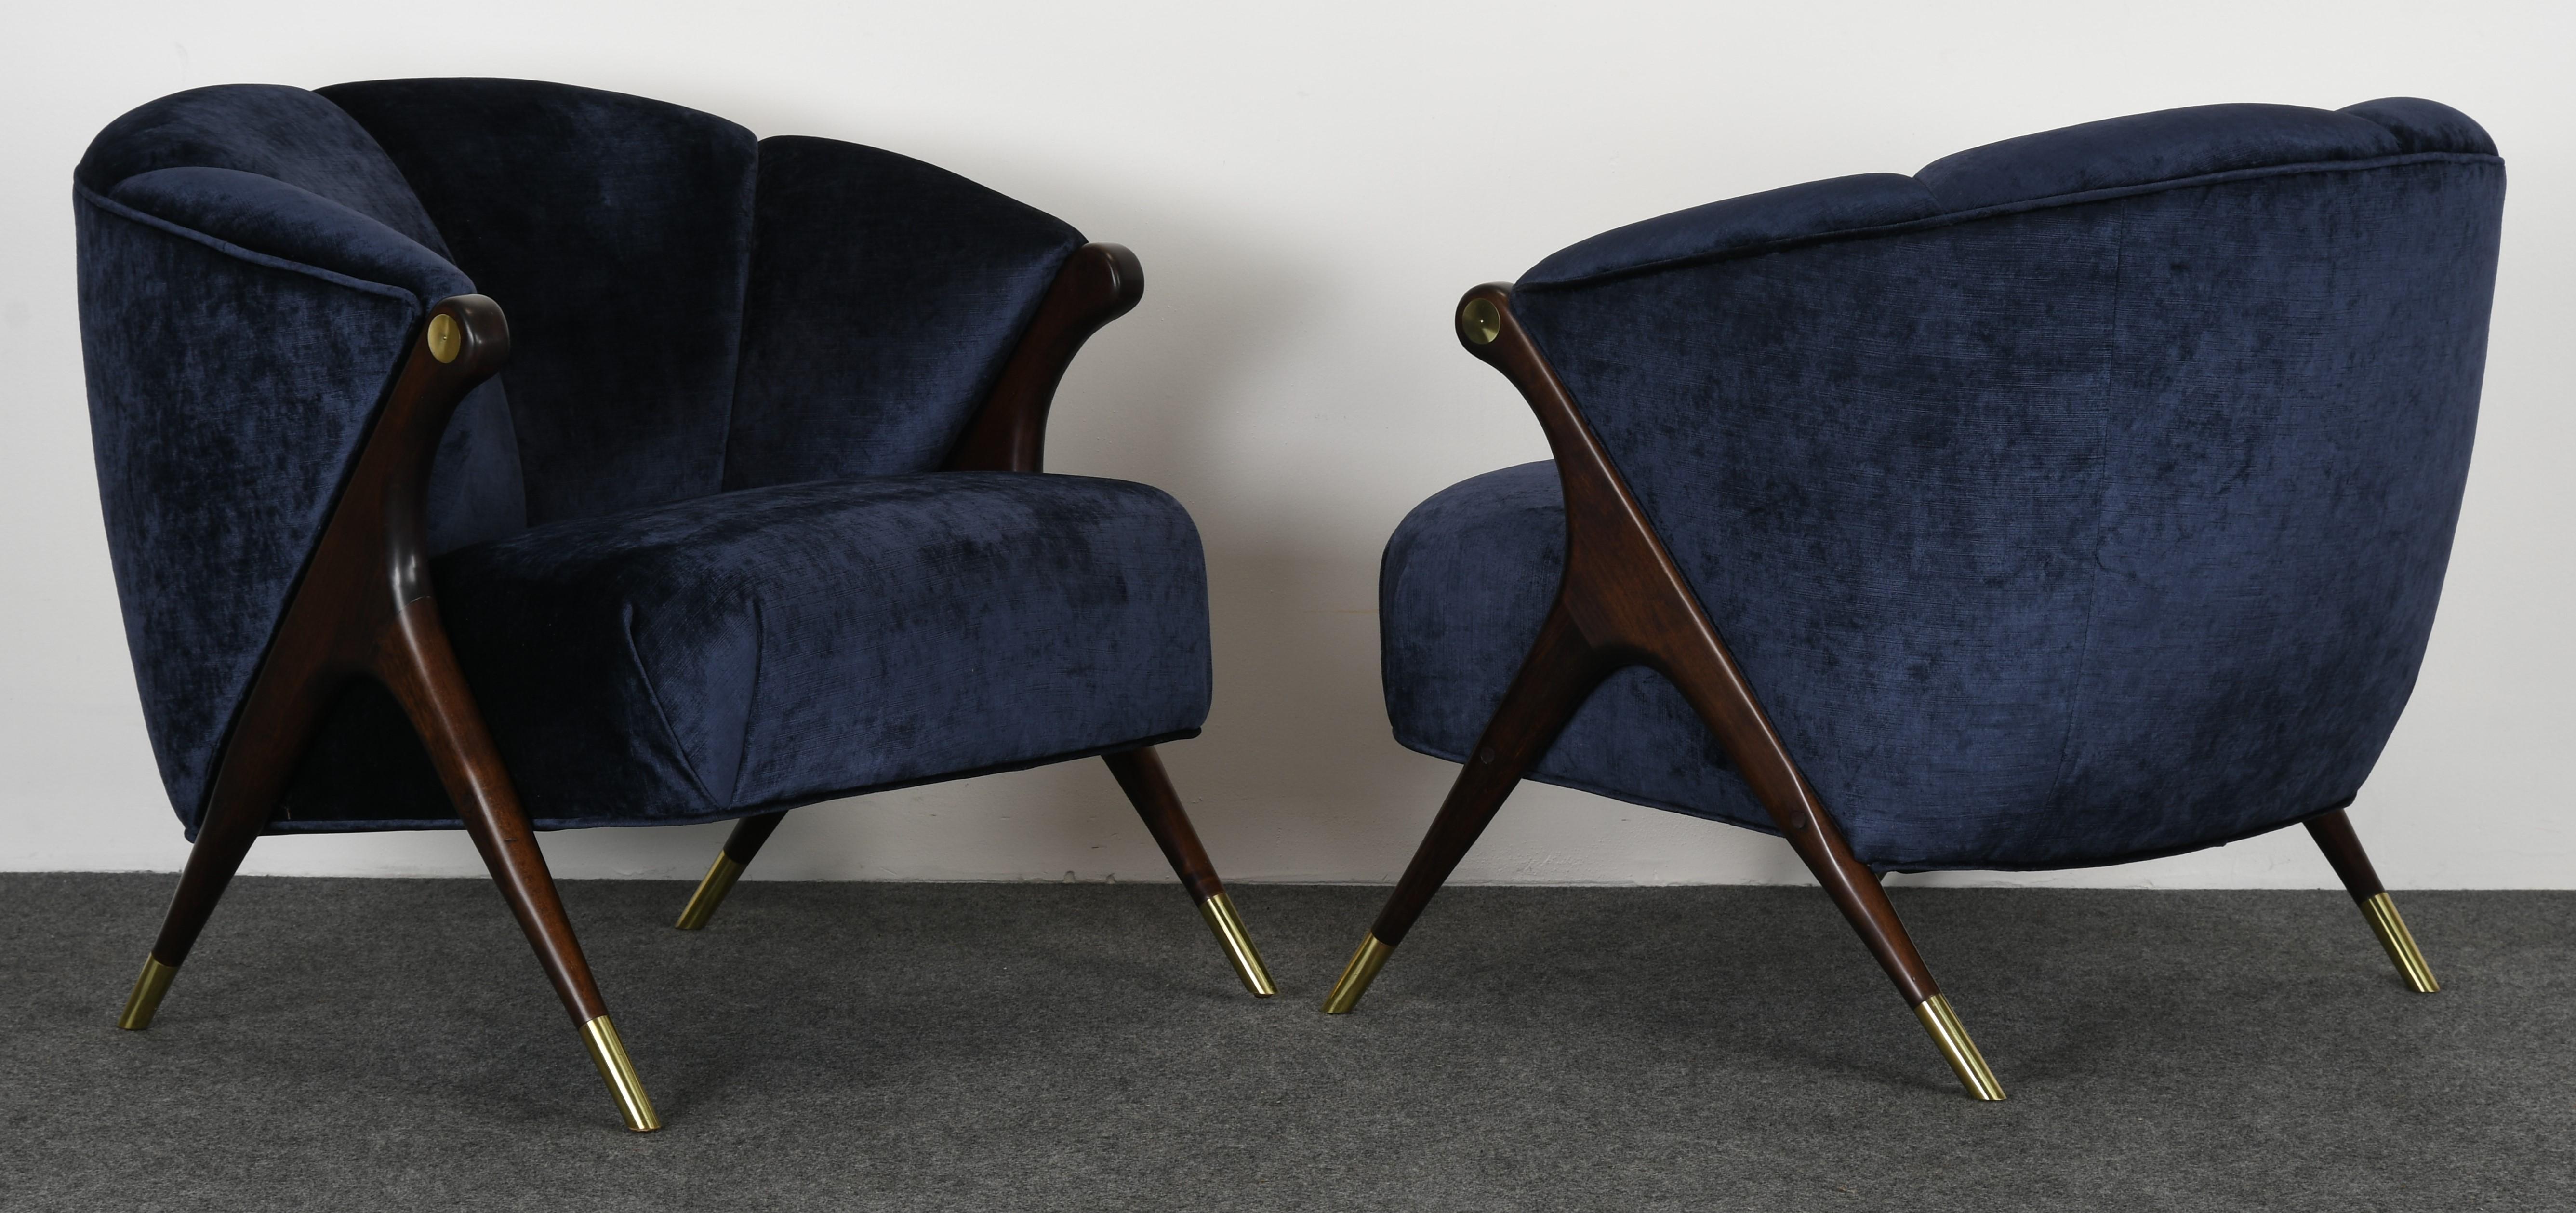 A pair of Karpen lounge chairs reupholstered in Ming Blue by Mokum for Holly Hunt. Wood has been beautifully refinished. Ready to place in your home.

Dimensions: 29.75